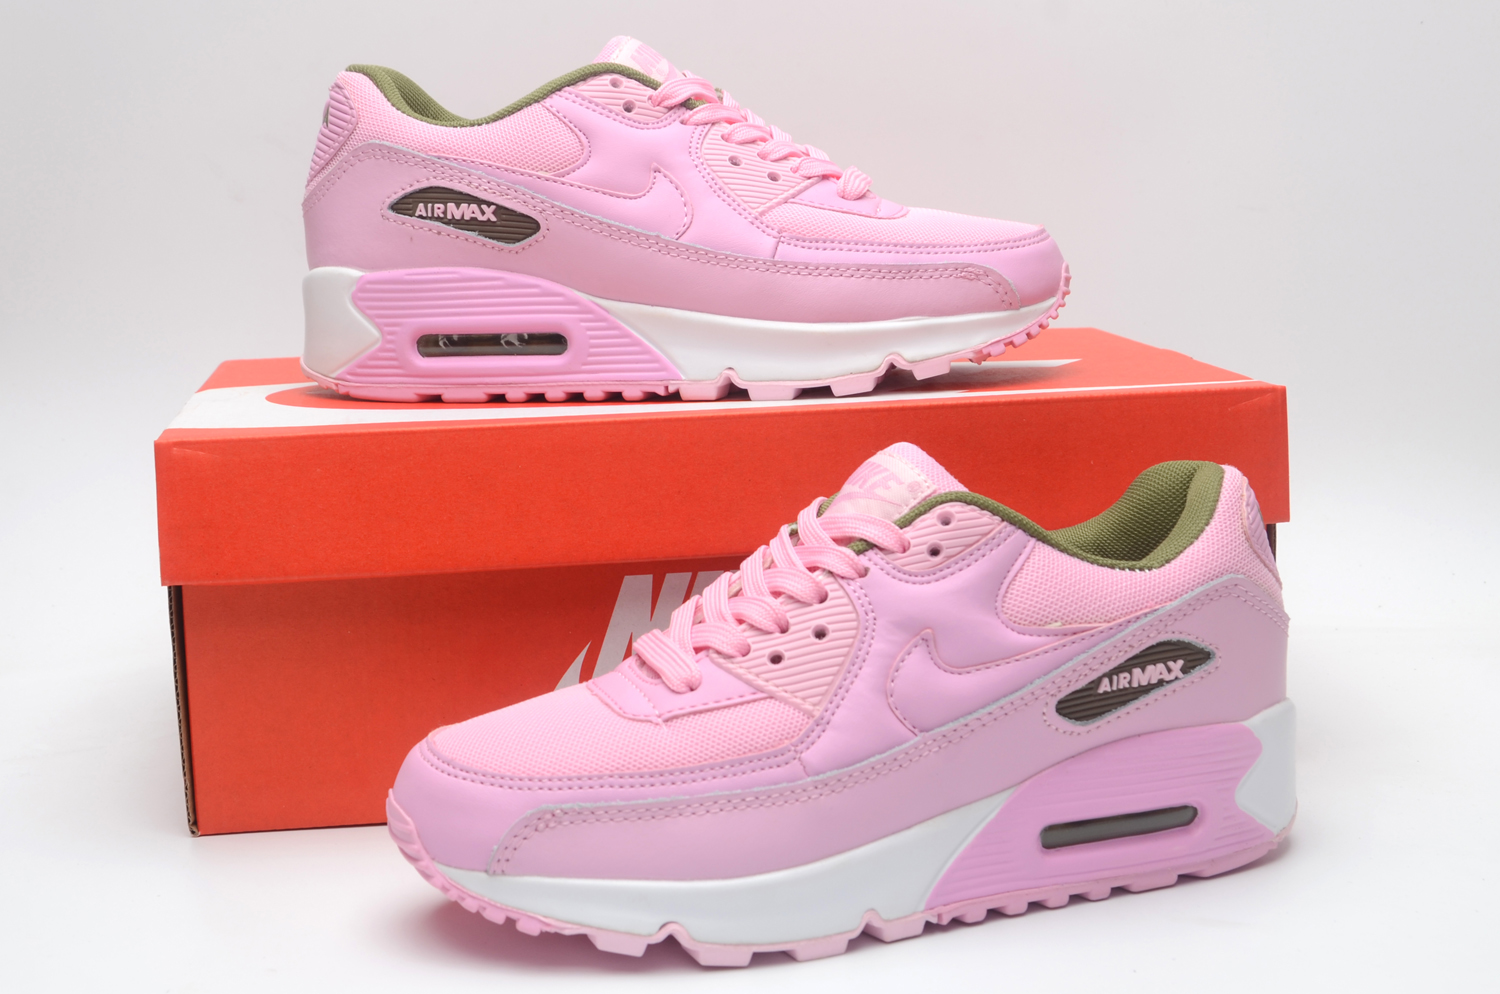 Women's Running weapon Air Max 90 Shoes 039